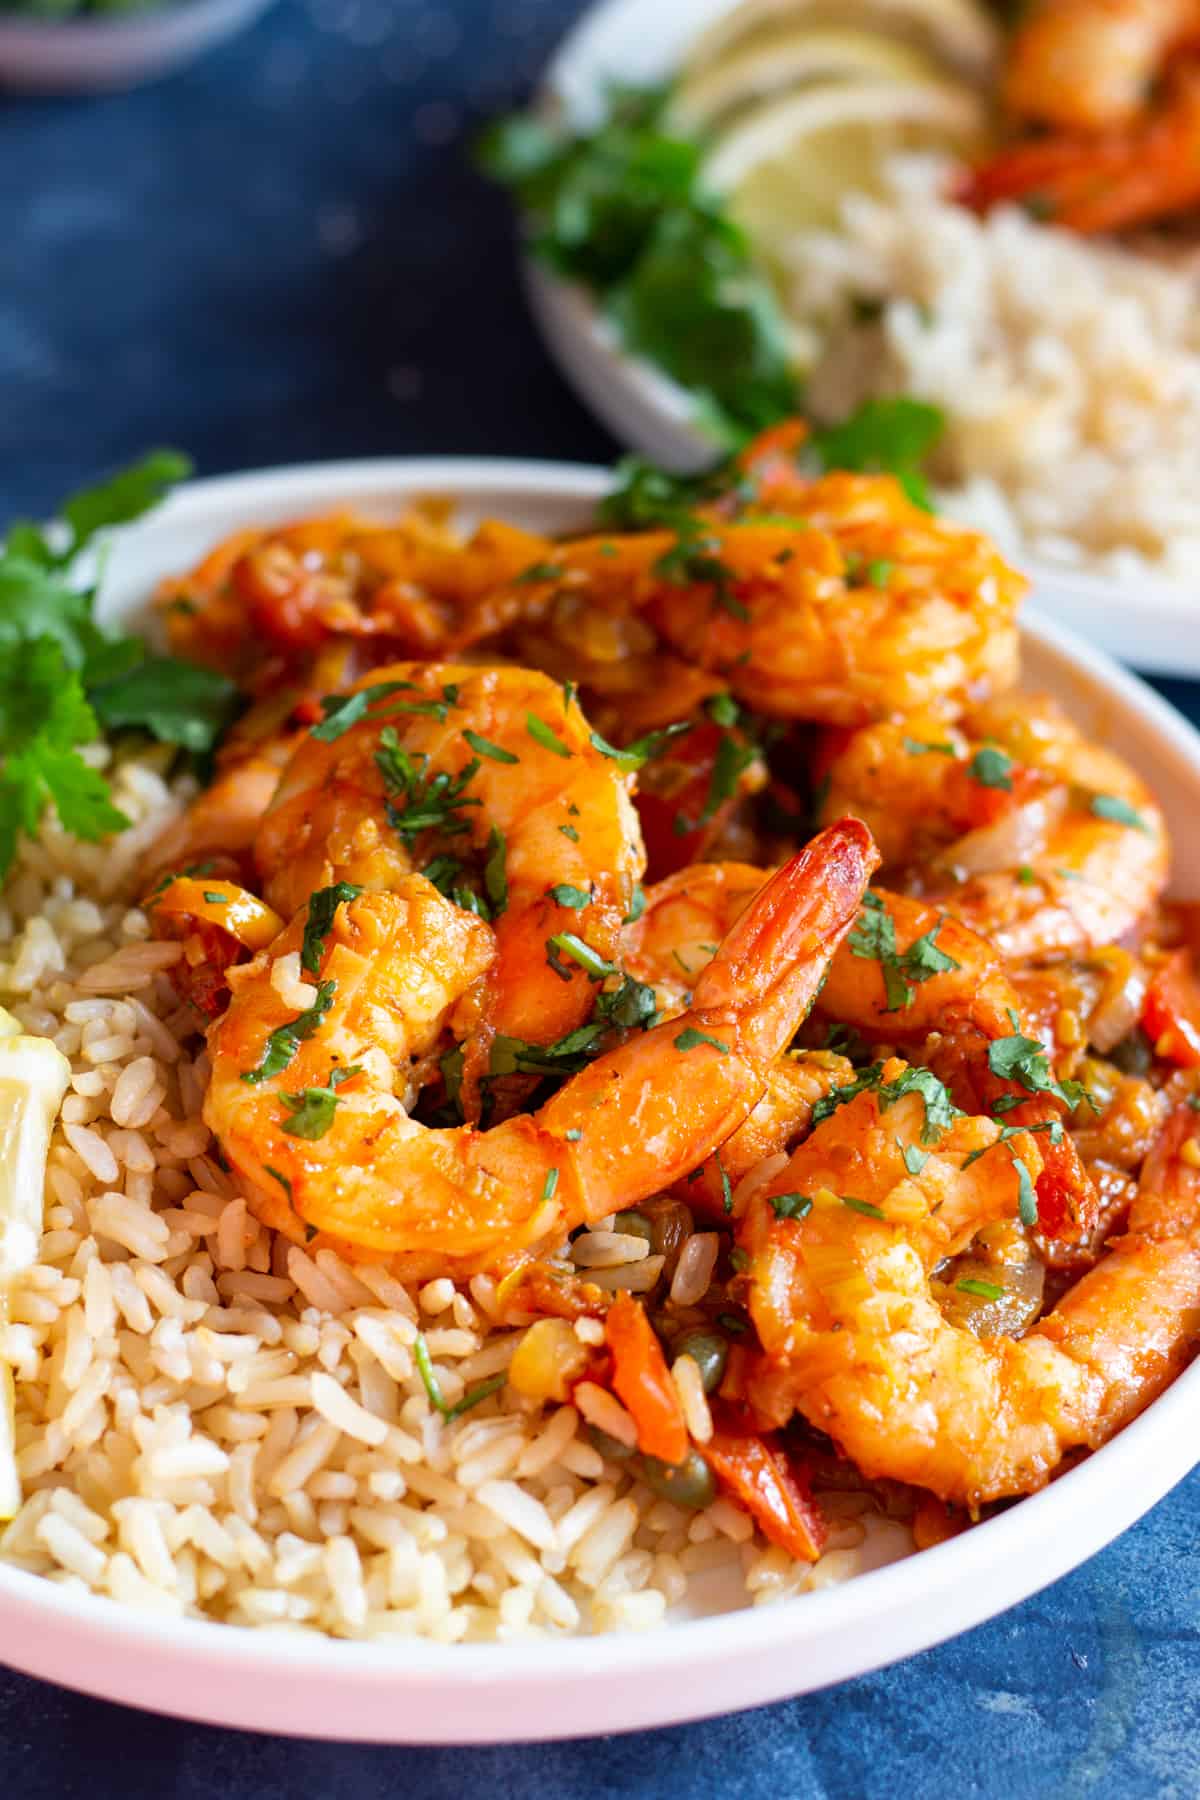 This easy Mediterranean style sauteed shrimp recipe is packed with fresh flavors. The aromatic blend of spices will make you feel like you’re dining in Spain or Greece without leaving your house.
